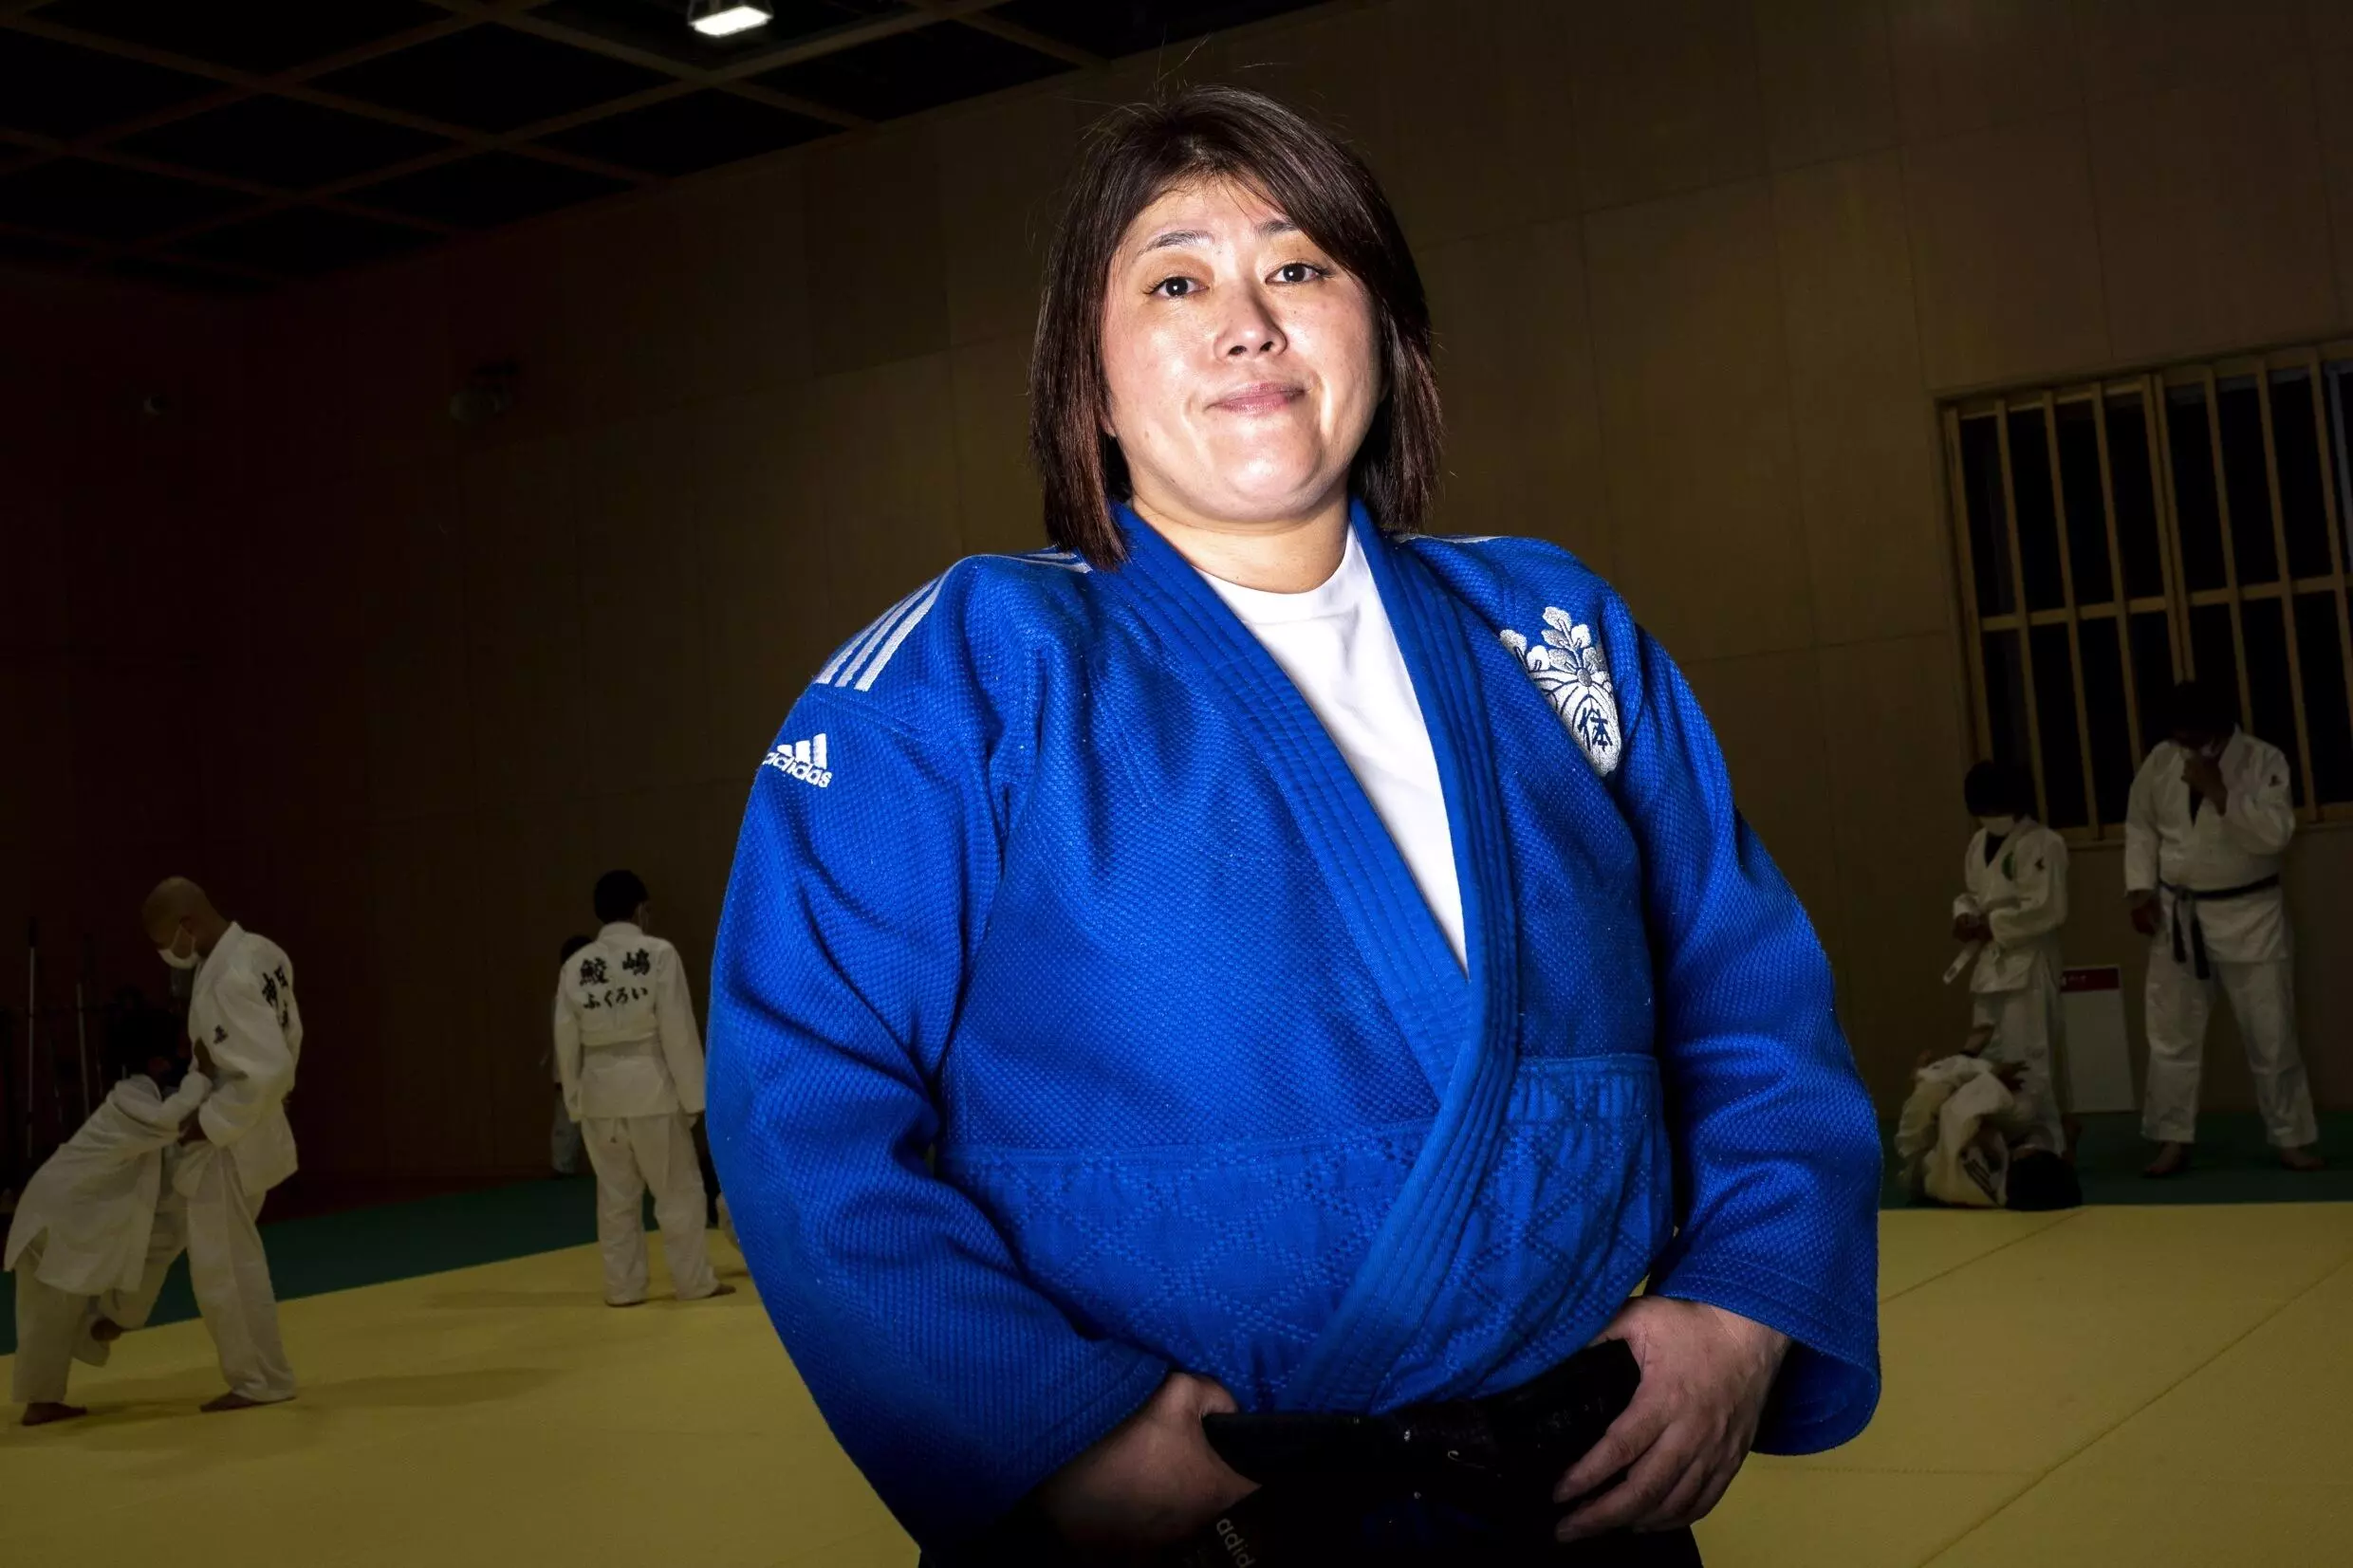 Noriko Mizoguchi, an Olympic silver medallist in 1992, says a belief that corporal punishment makes children stronger is still common in Japan. Photo: AFP